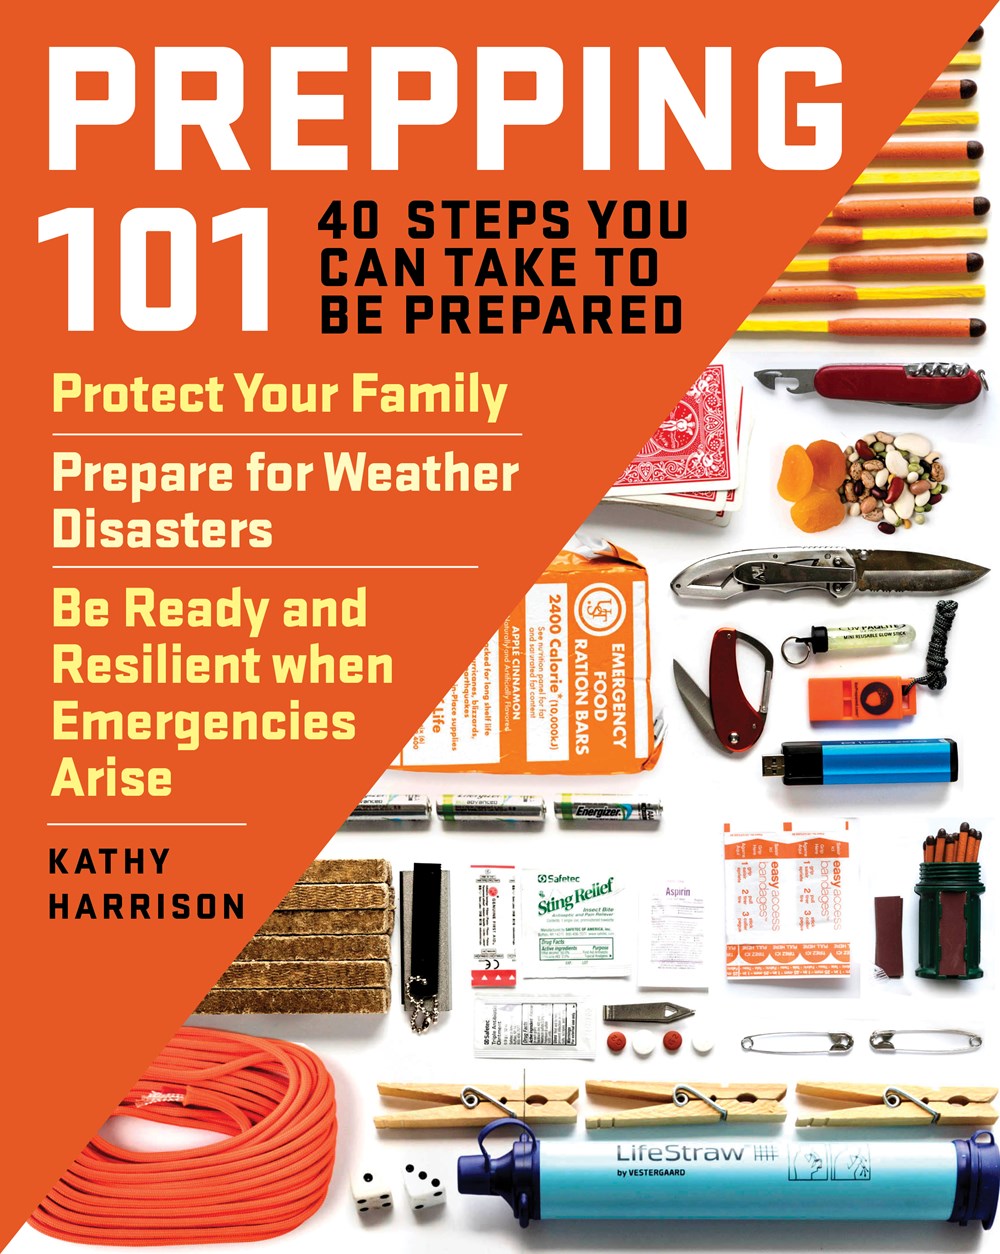 Prepping 101: 40 Steps You Can Take to be Prepared